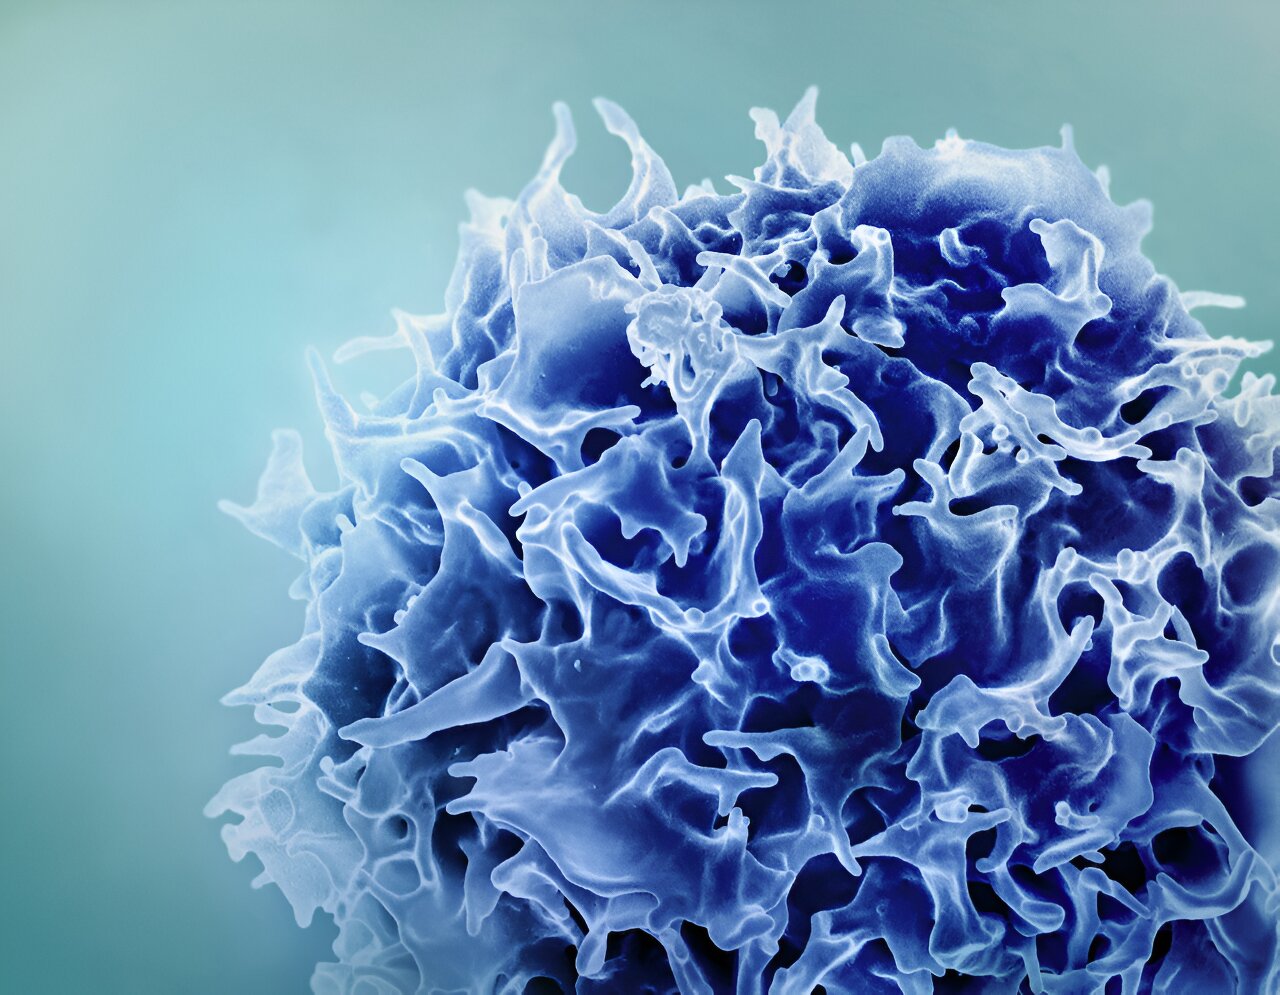 New research has major implications for controlling T cell activity